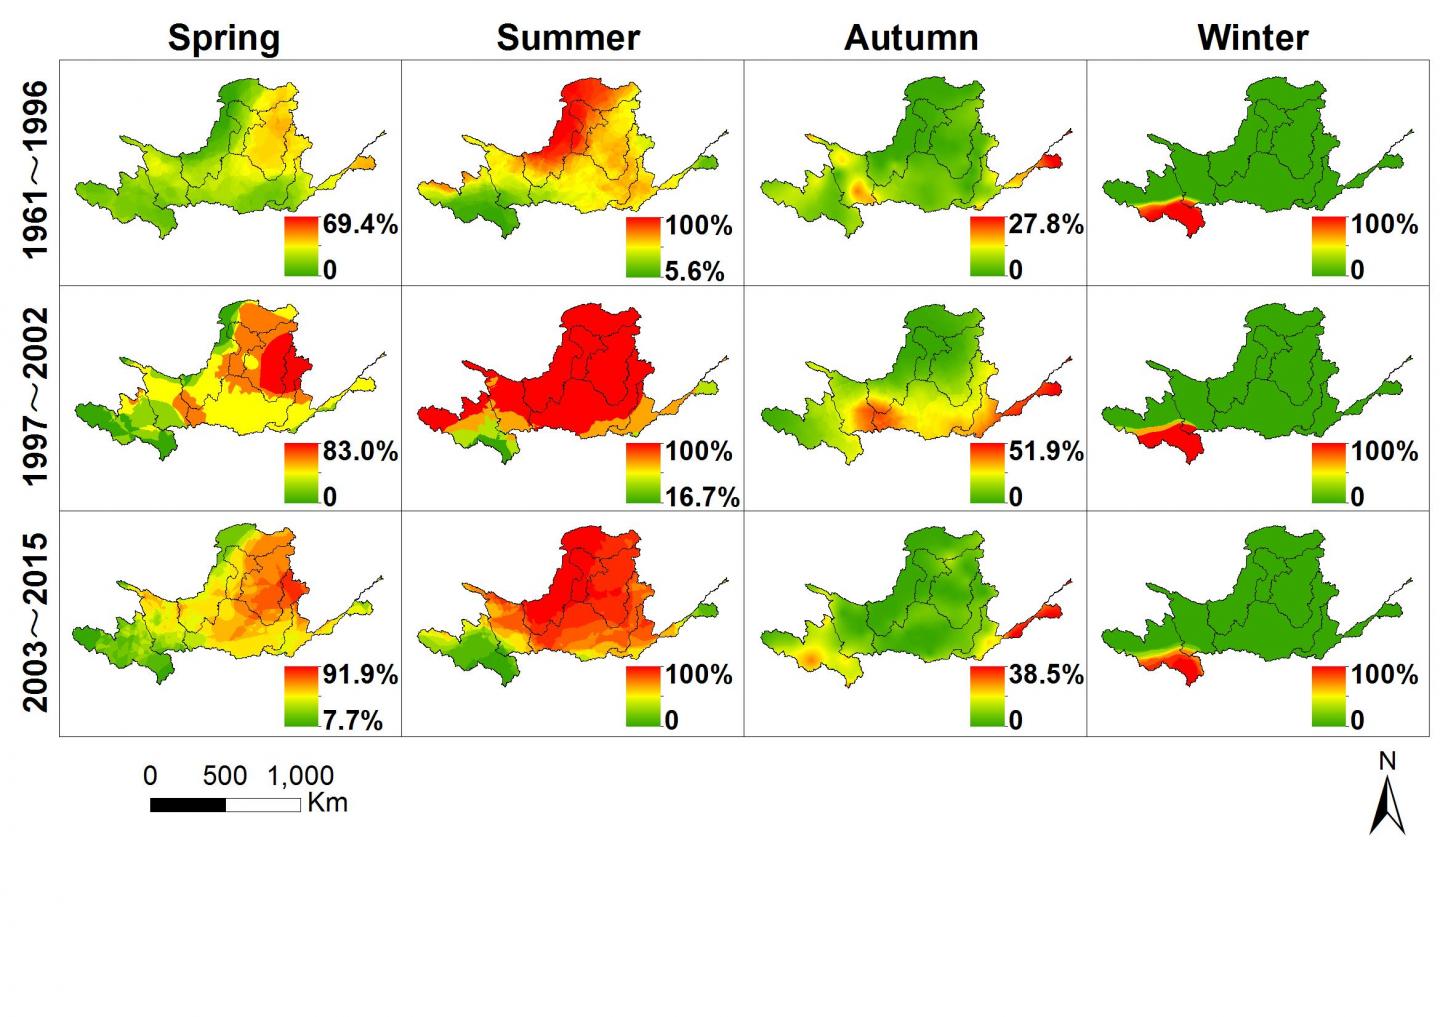 Figure 1. Spatial Distribution of Drought Frequency in Different Research Periods